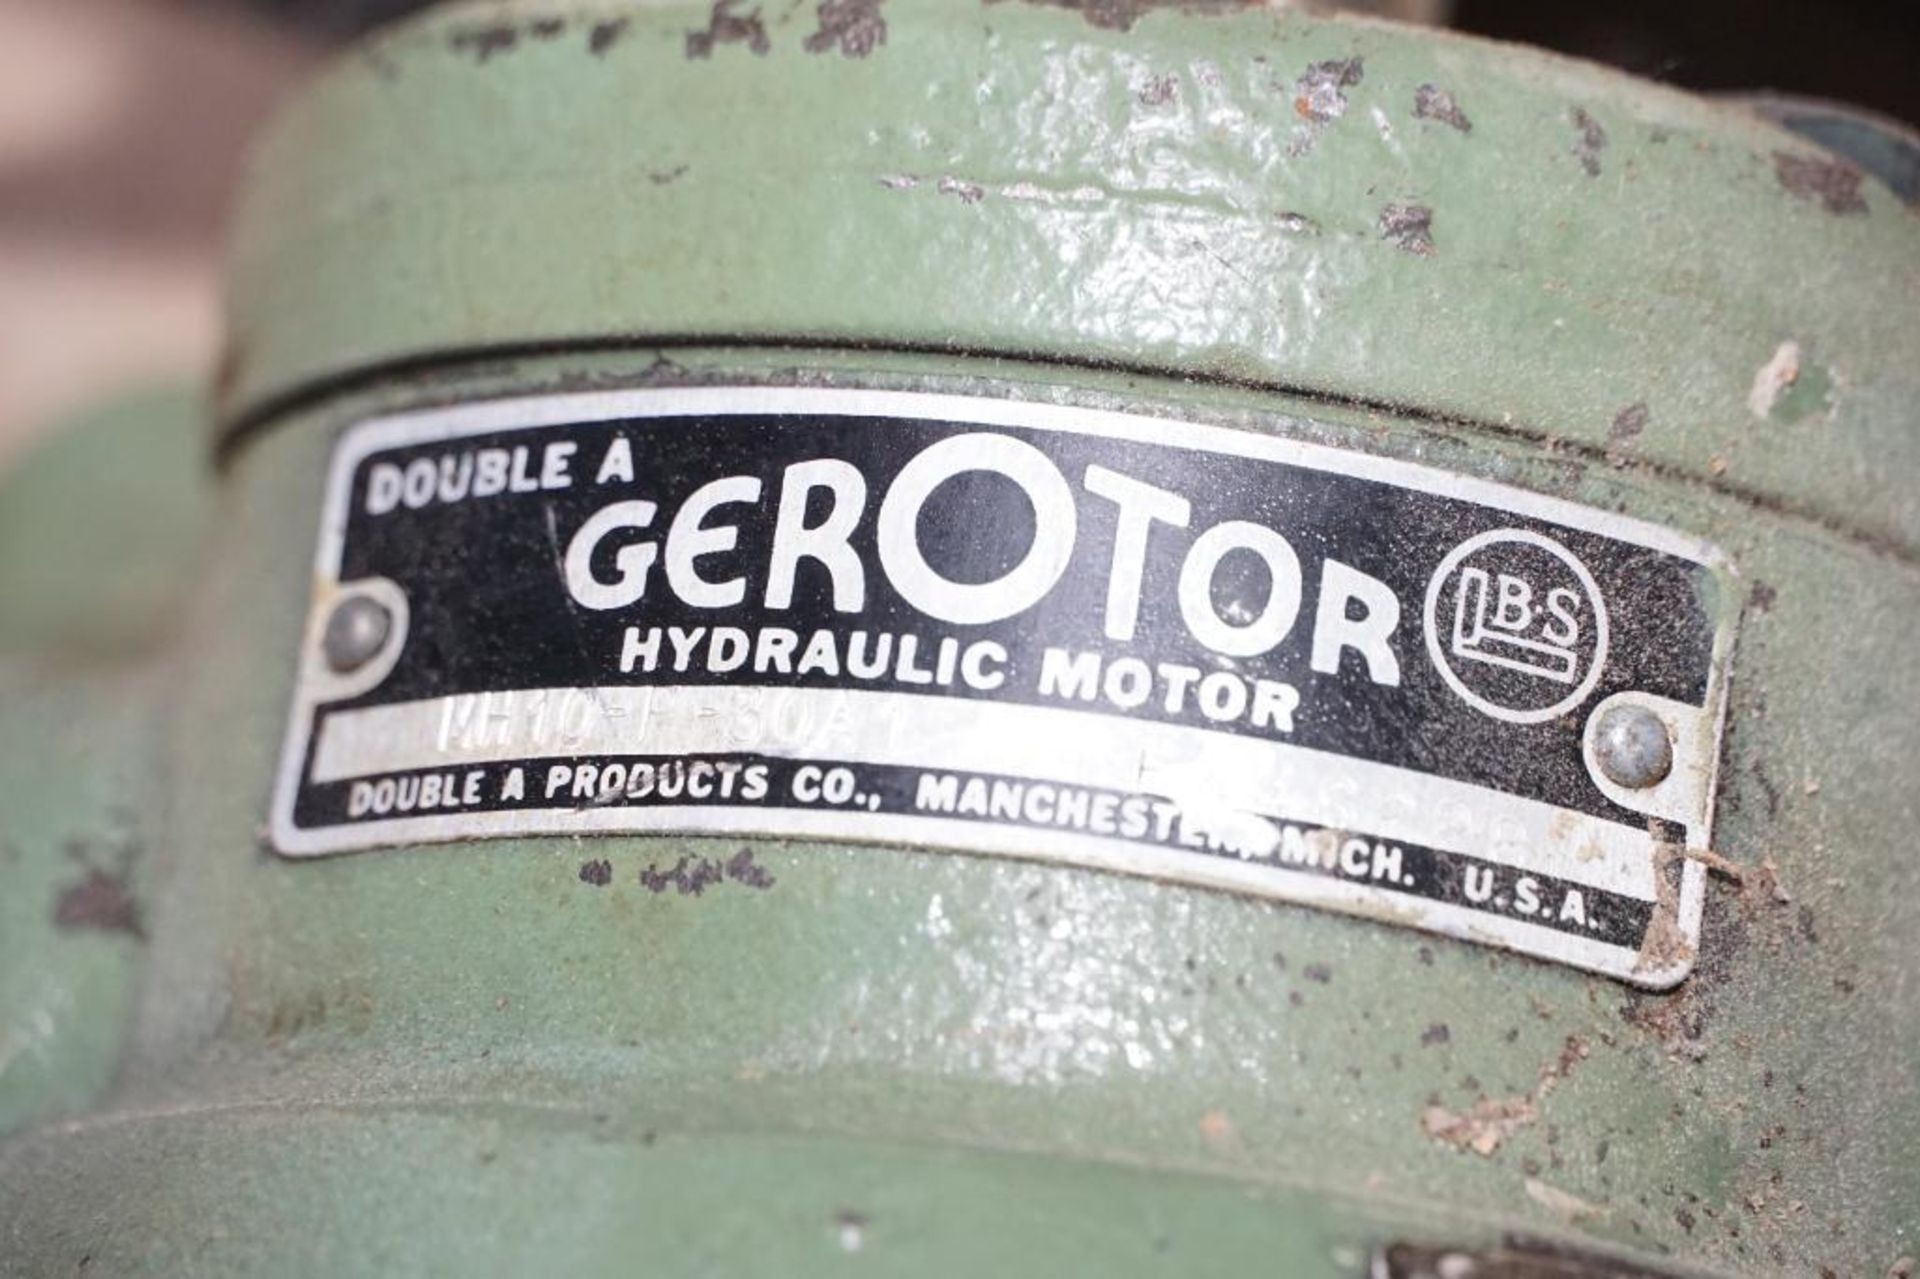 Geroter Hydraulic Motor - Image 3 of 3